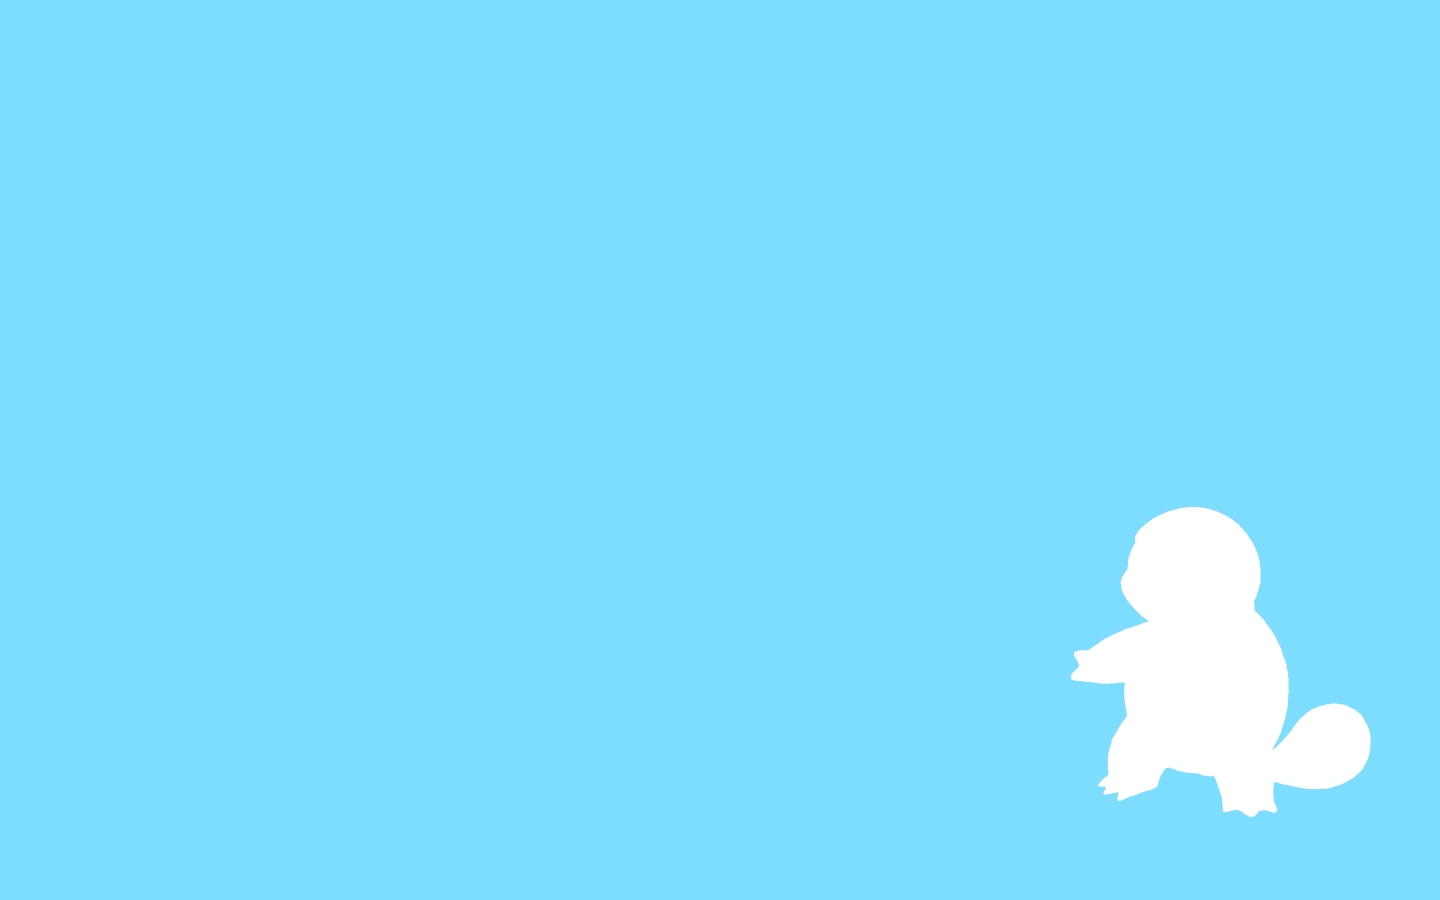 Squirtle Schiggy Minimalistic Wallpaper By Thedmwarrior On